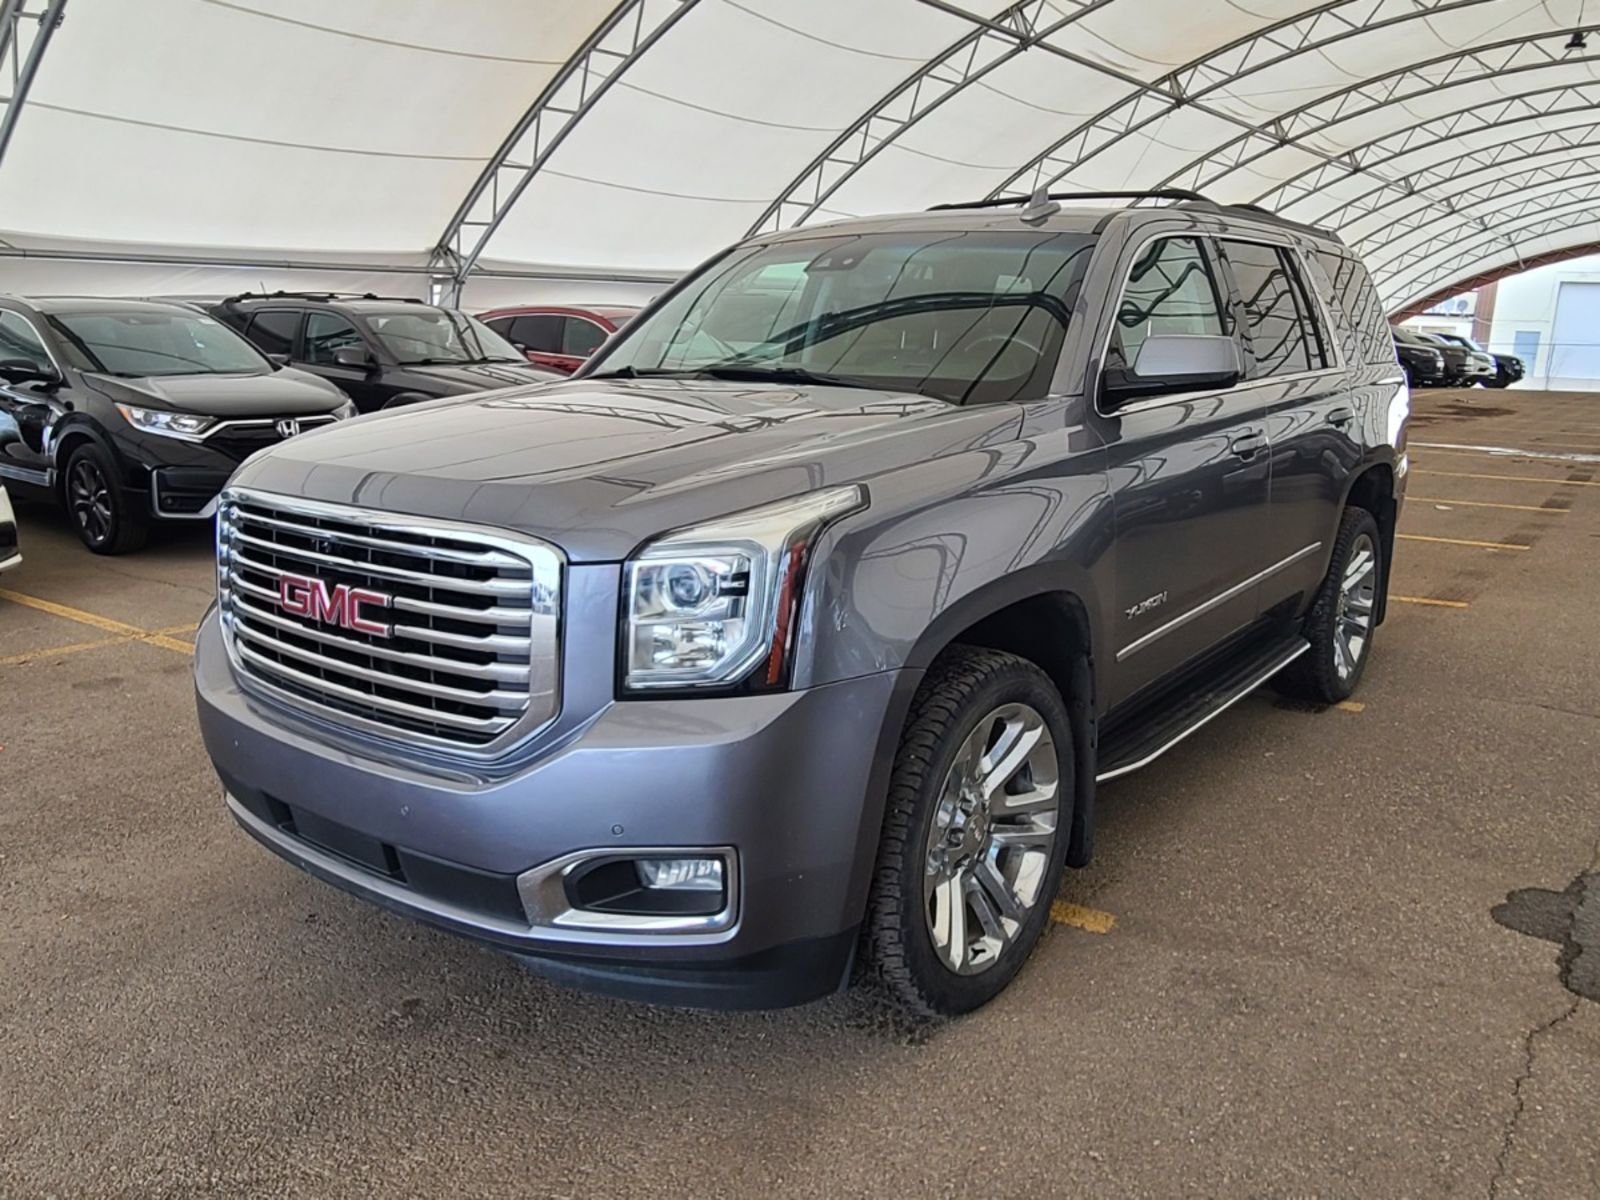 2018 GMC Yukon One Owner, No Accidents